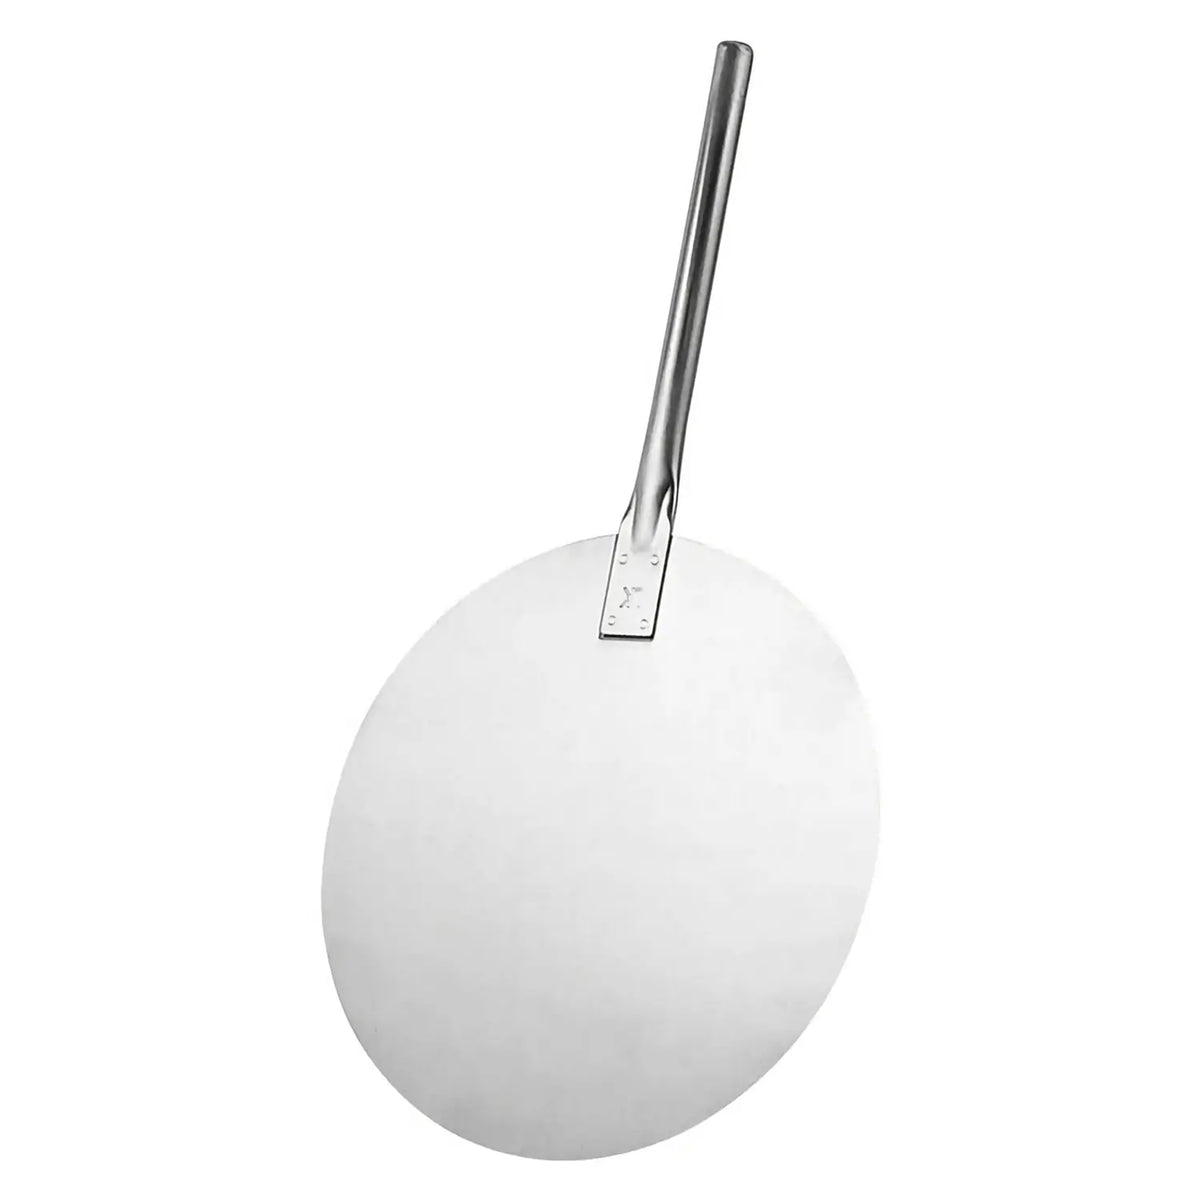 Sampo Sangyo Stainless Steel Pizza Peel with Short Handle